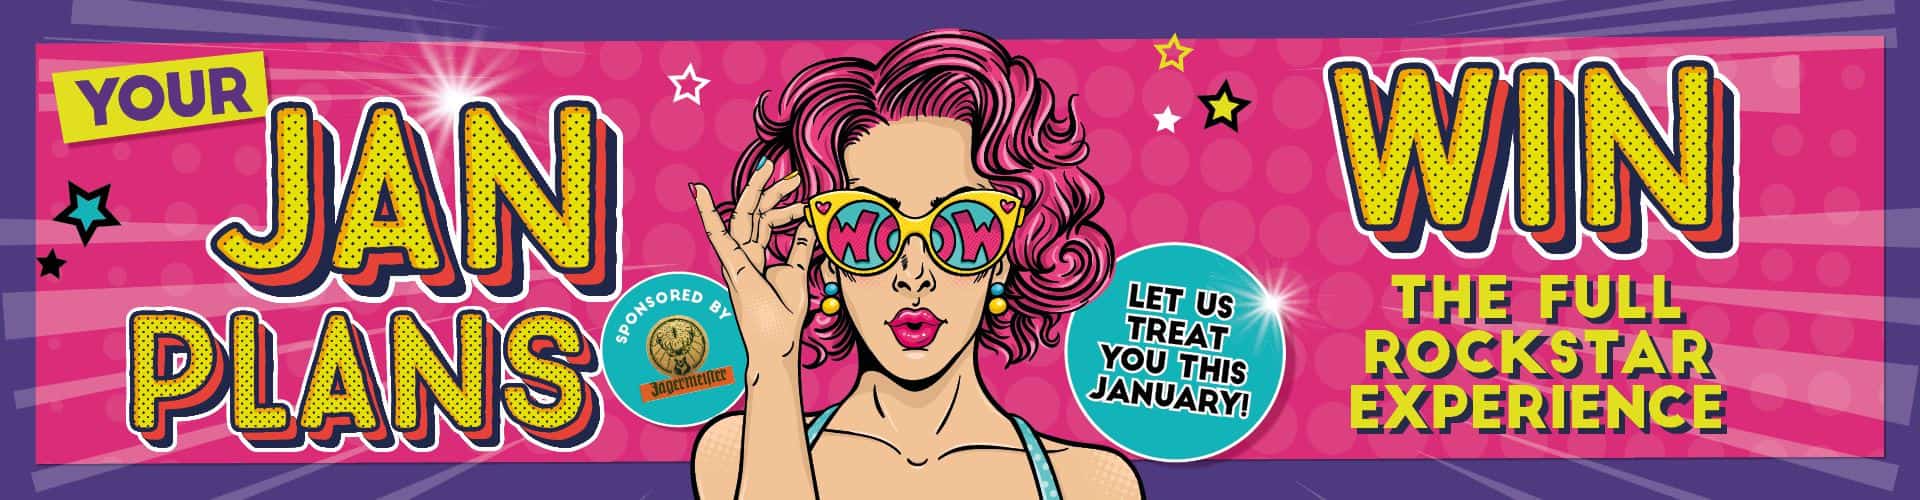 Your Jan Plans! Win the Full Rockstar Experience